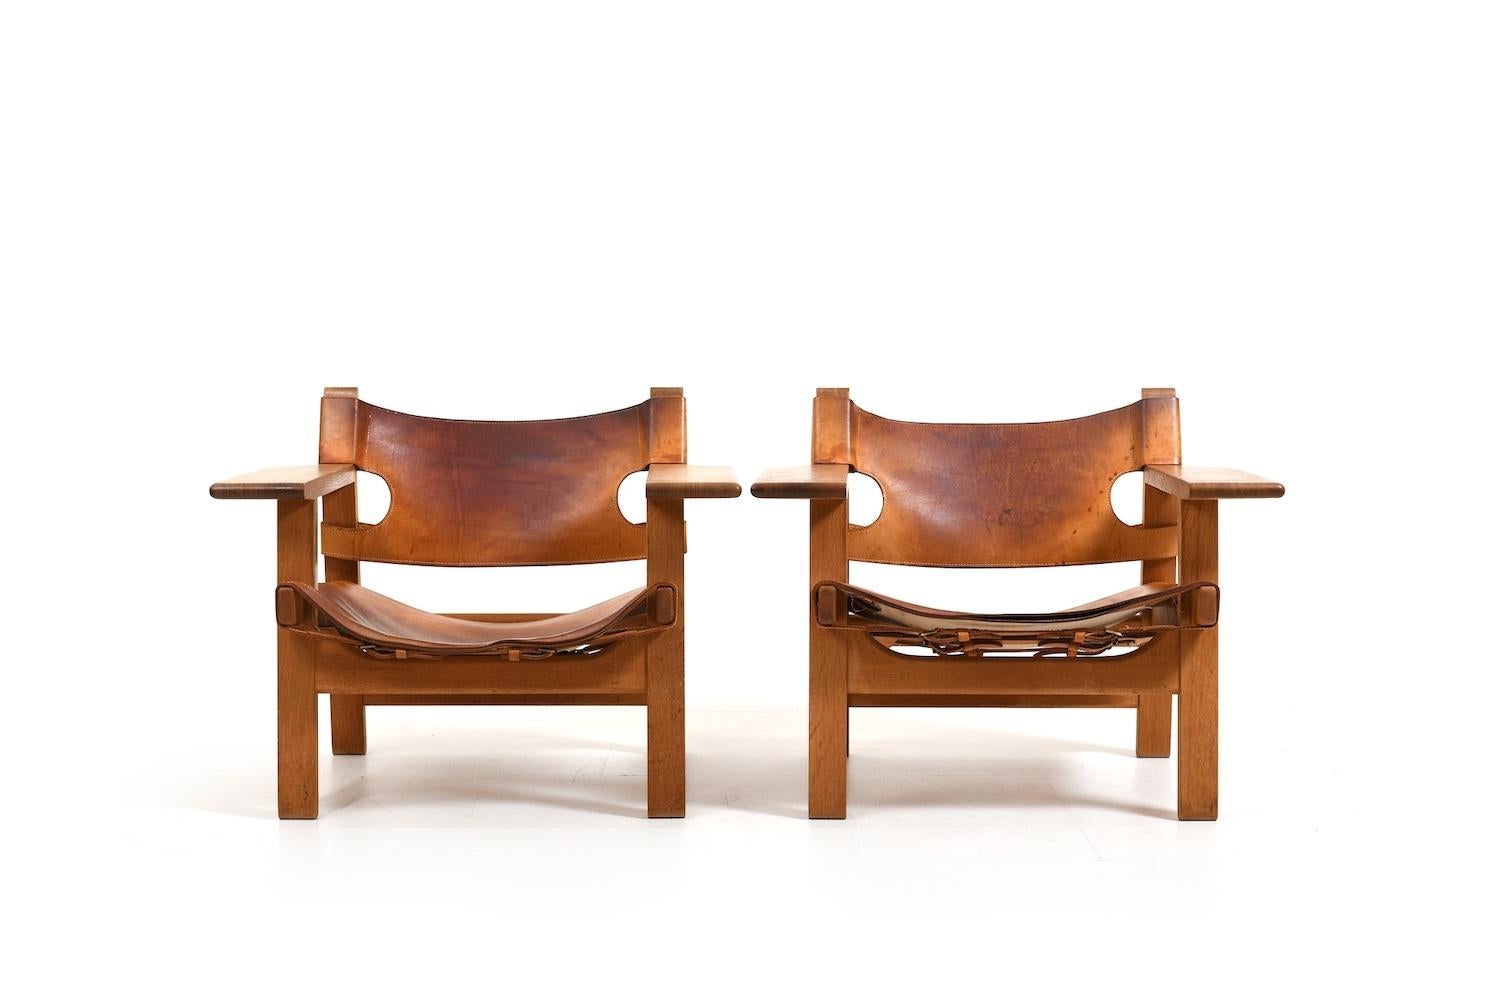 Scandinavian Modern Pair of Old Spanish Chairs by Børge Mogensen early 1960s For Sale